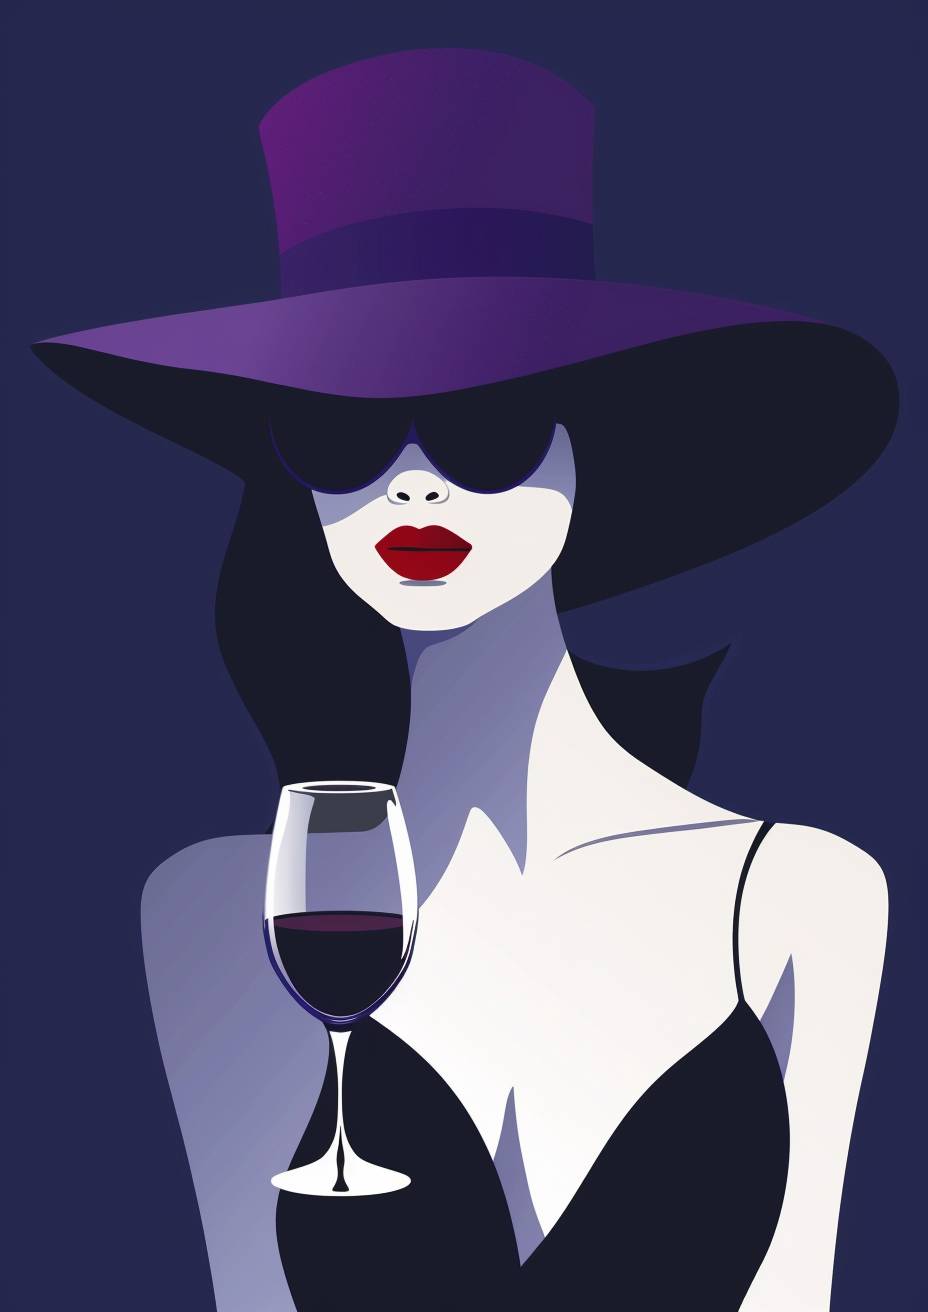 A minimalist poster design. A mysterious woman with purple hat, white skin and red lips wearing a black dress. She is holding a glass of wine. Minimalist vector illustration in the style of Patrick Nagel. Deep blue background. Clean lines, bold shapes, sleek. Inspired by vintage fashion posters. High contrast. Monochromatic color scheme. Bold shadowing. Isolated on a dark navy background.